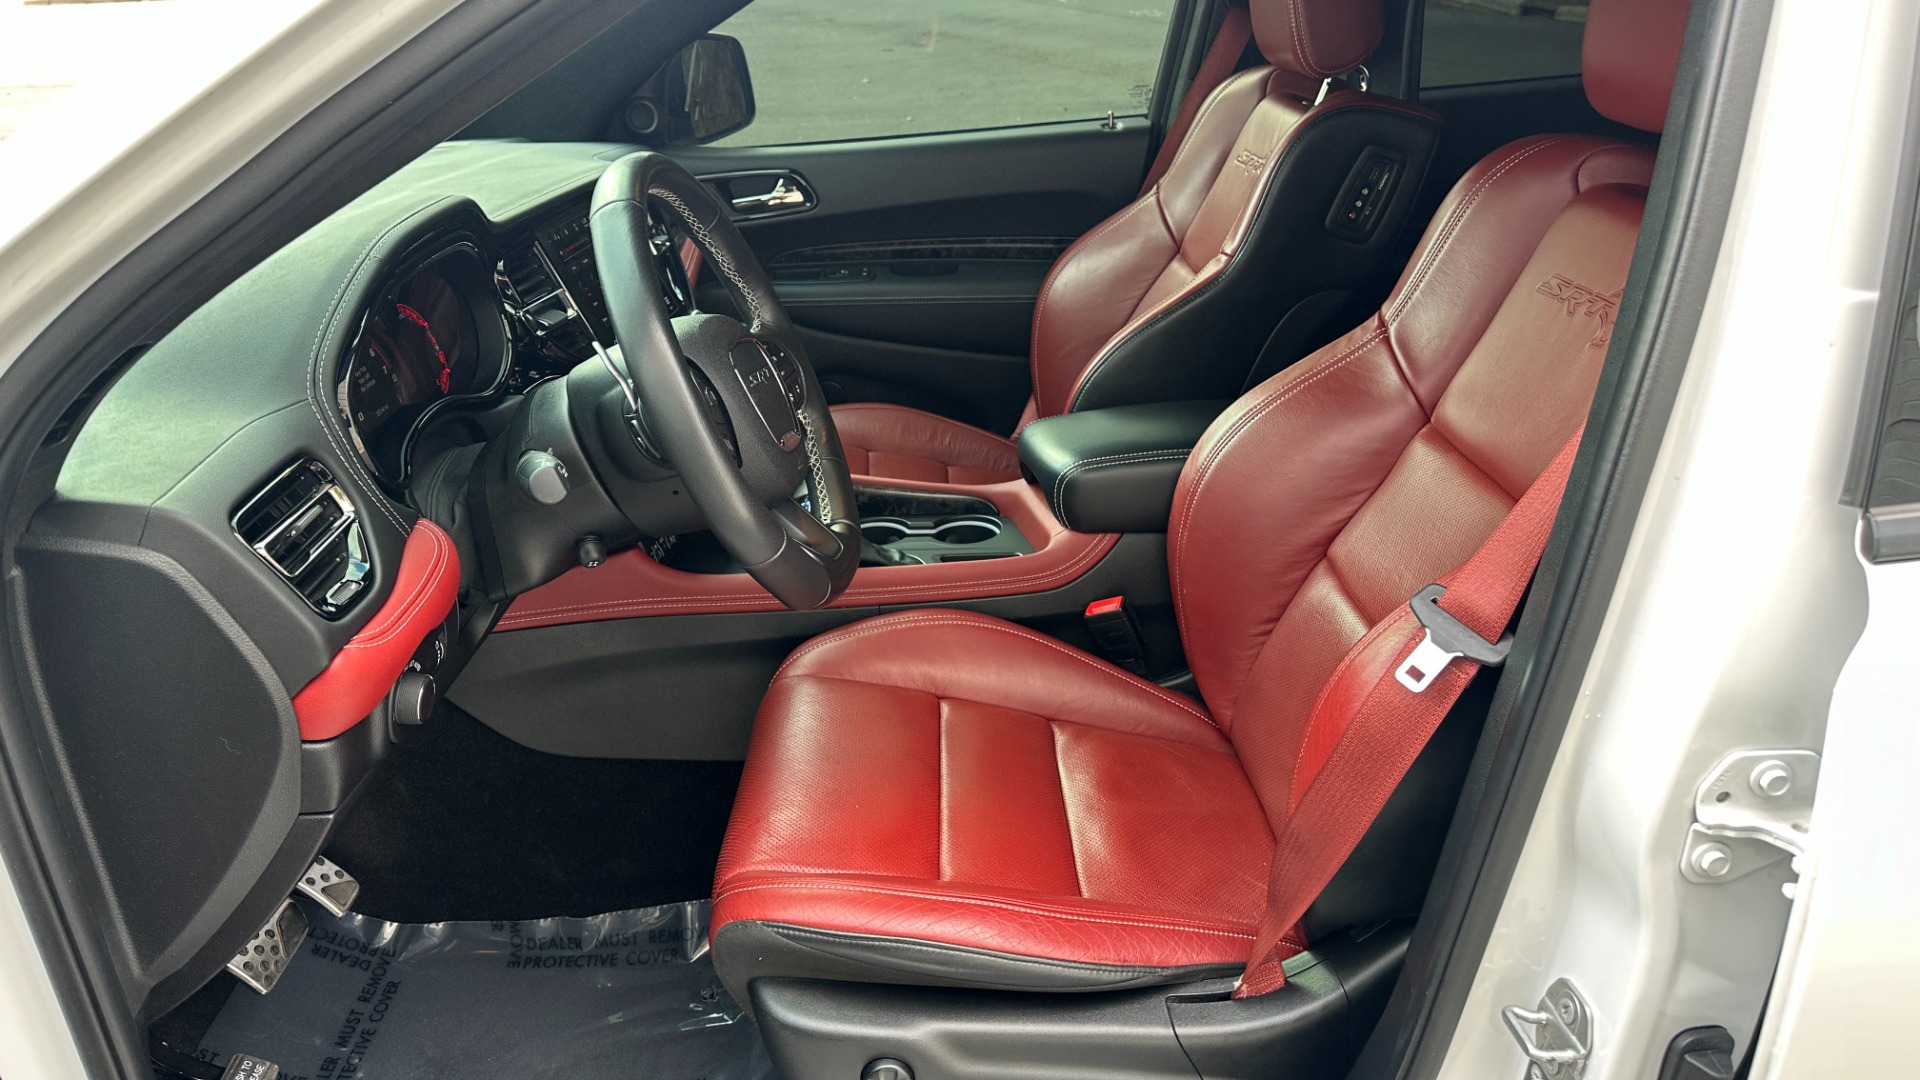 Used 2021 Dodge Durango SRT HELLCAT / CAPTAIN CHAIRS / DVD SCREENS / INTAKE / PULLEY for sale $98,495 at Formula Imports in Charlotte NC 28227 13